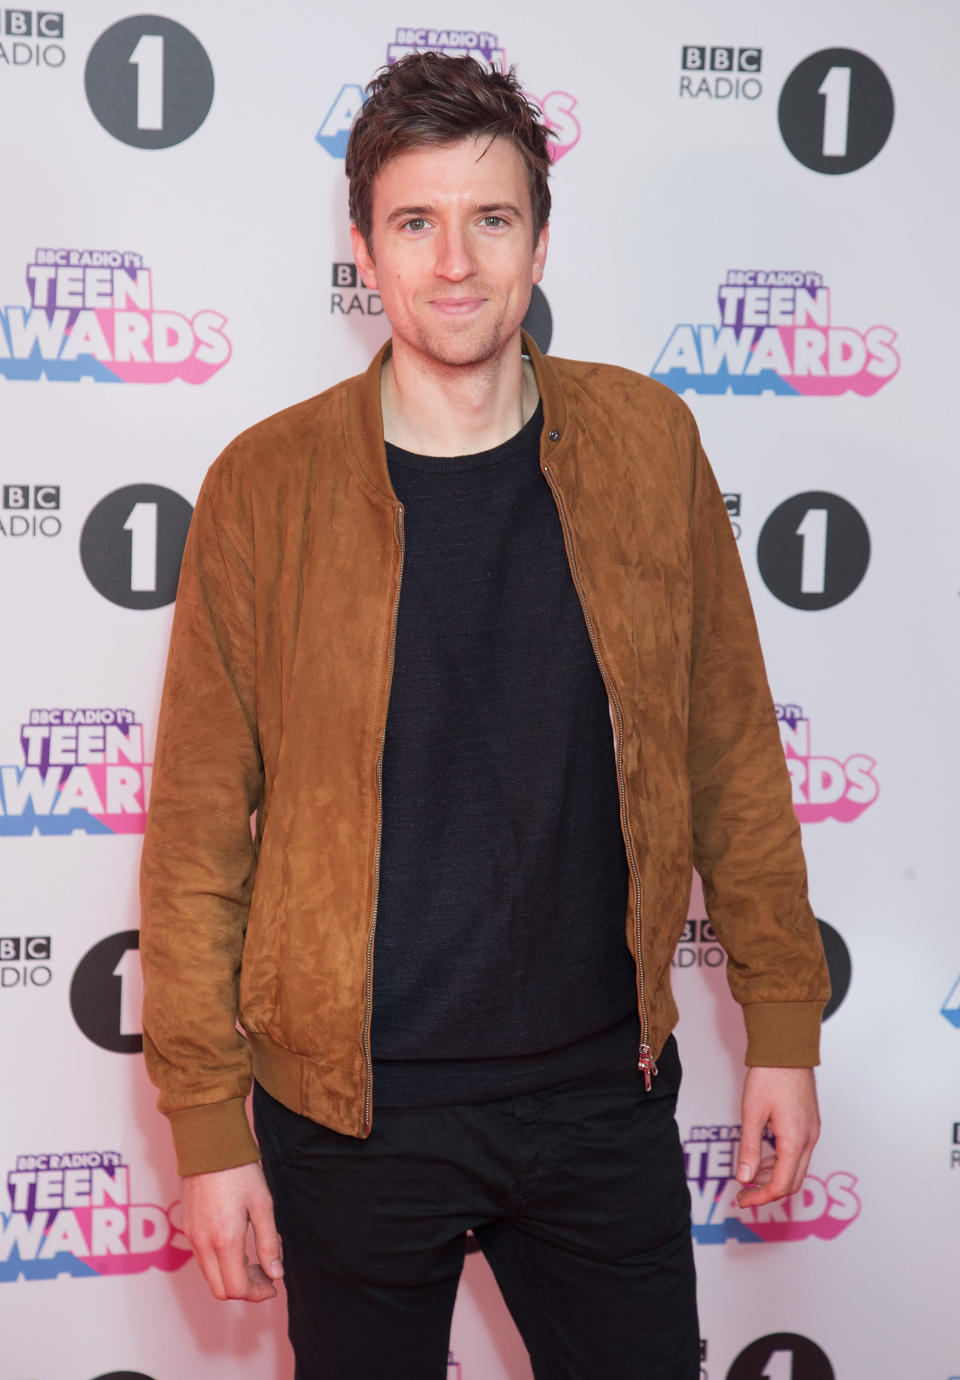 Greg James attends the BBC Radio 1 Teen Awards in 2017. (Photo: Jo Hale via Getty Images)